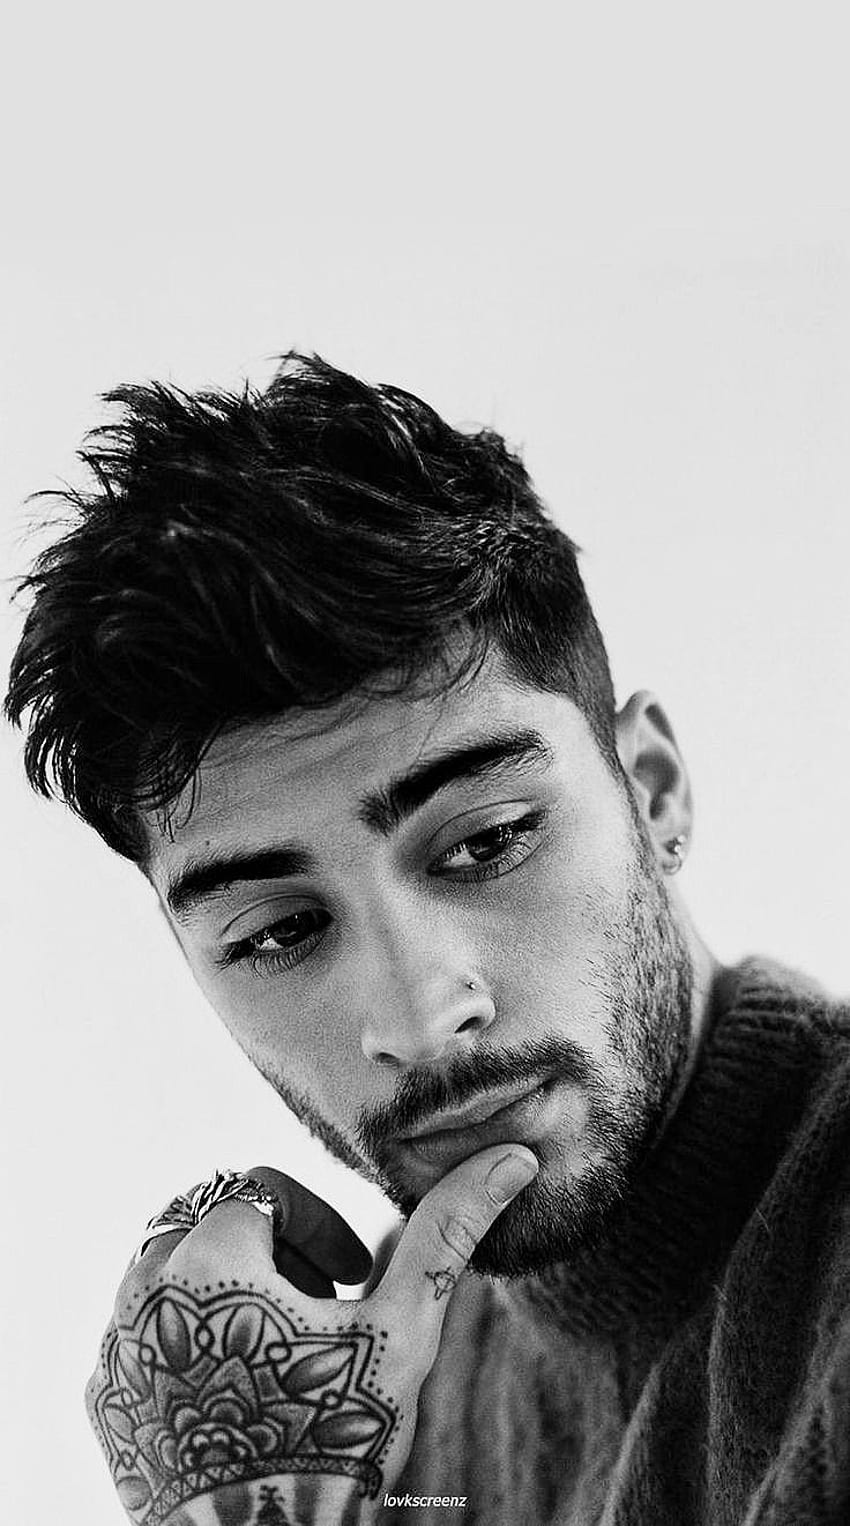 Which is the best hair style for Zayn Malik? - Quora